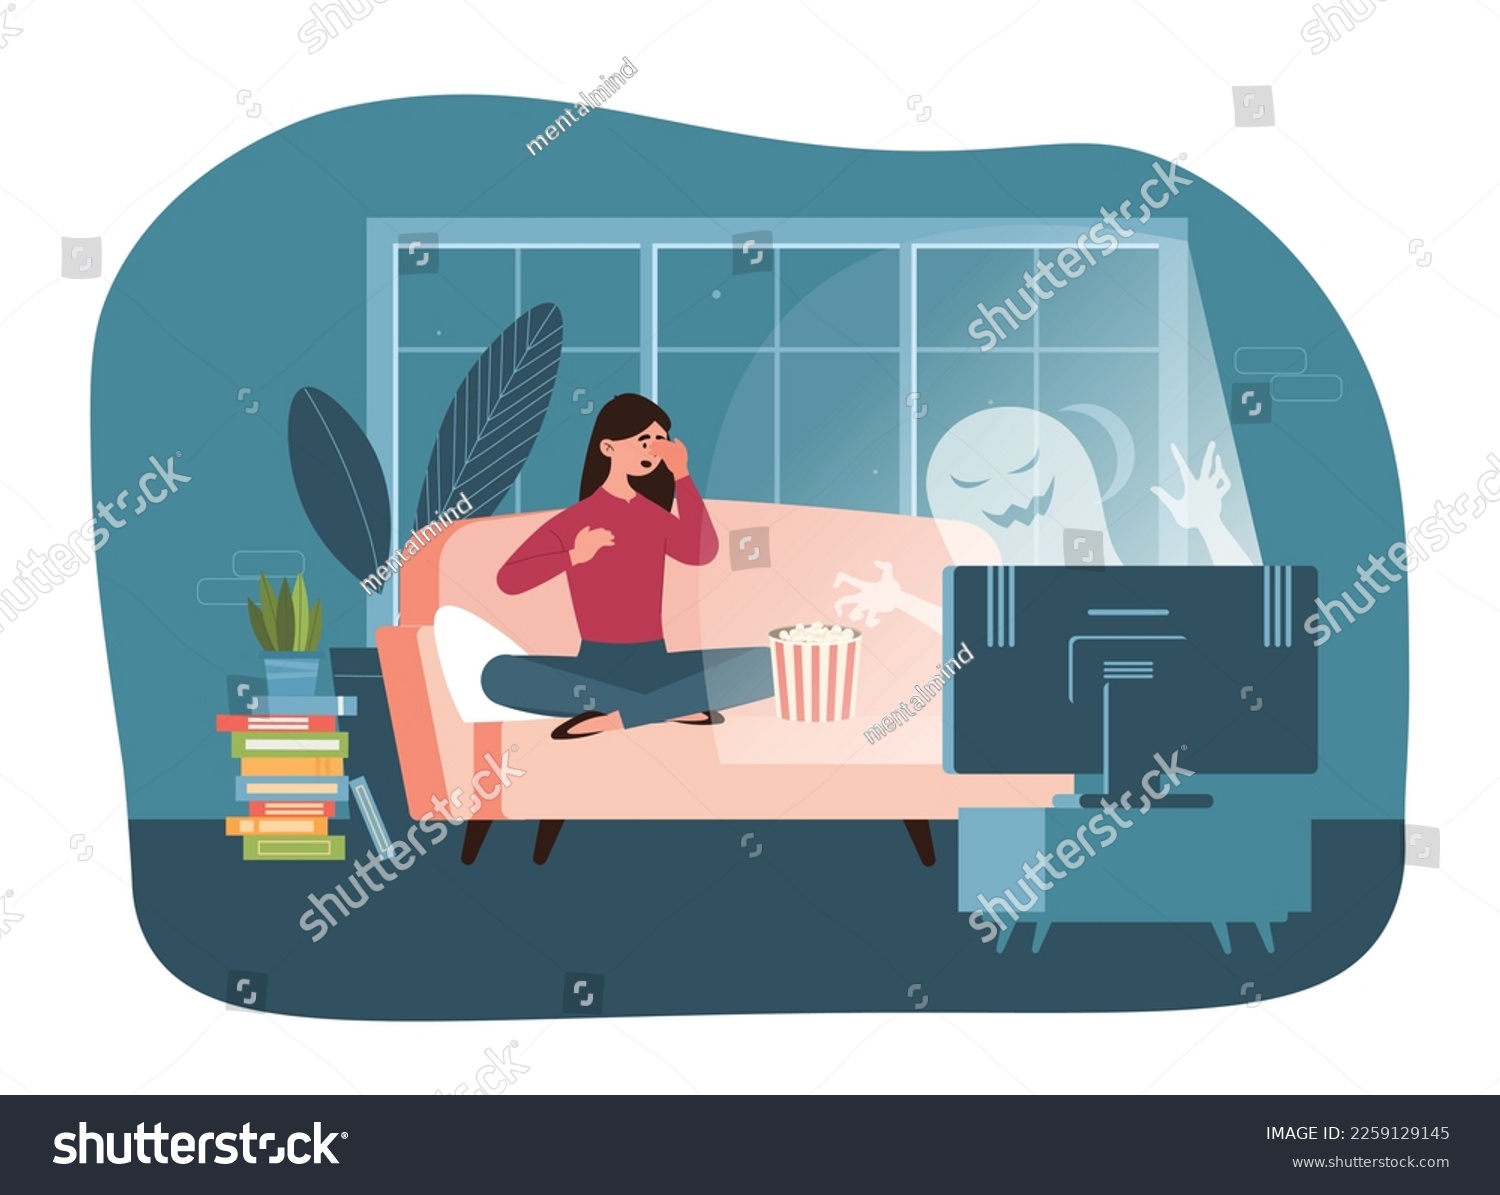 SVG of Scary films watch. Young girl with popcorn sits on couch and looks at TV screen with ghost. Evening rest after work or study. Horror movie at home or apartment. Cartoon flat vector illustration svg